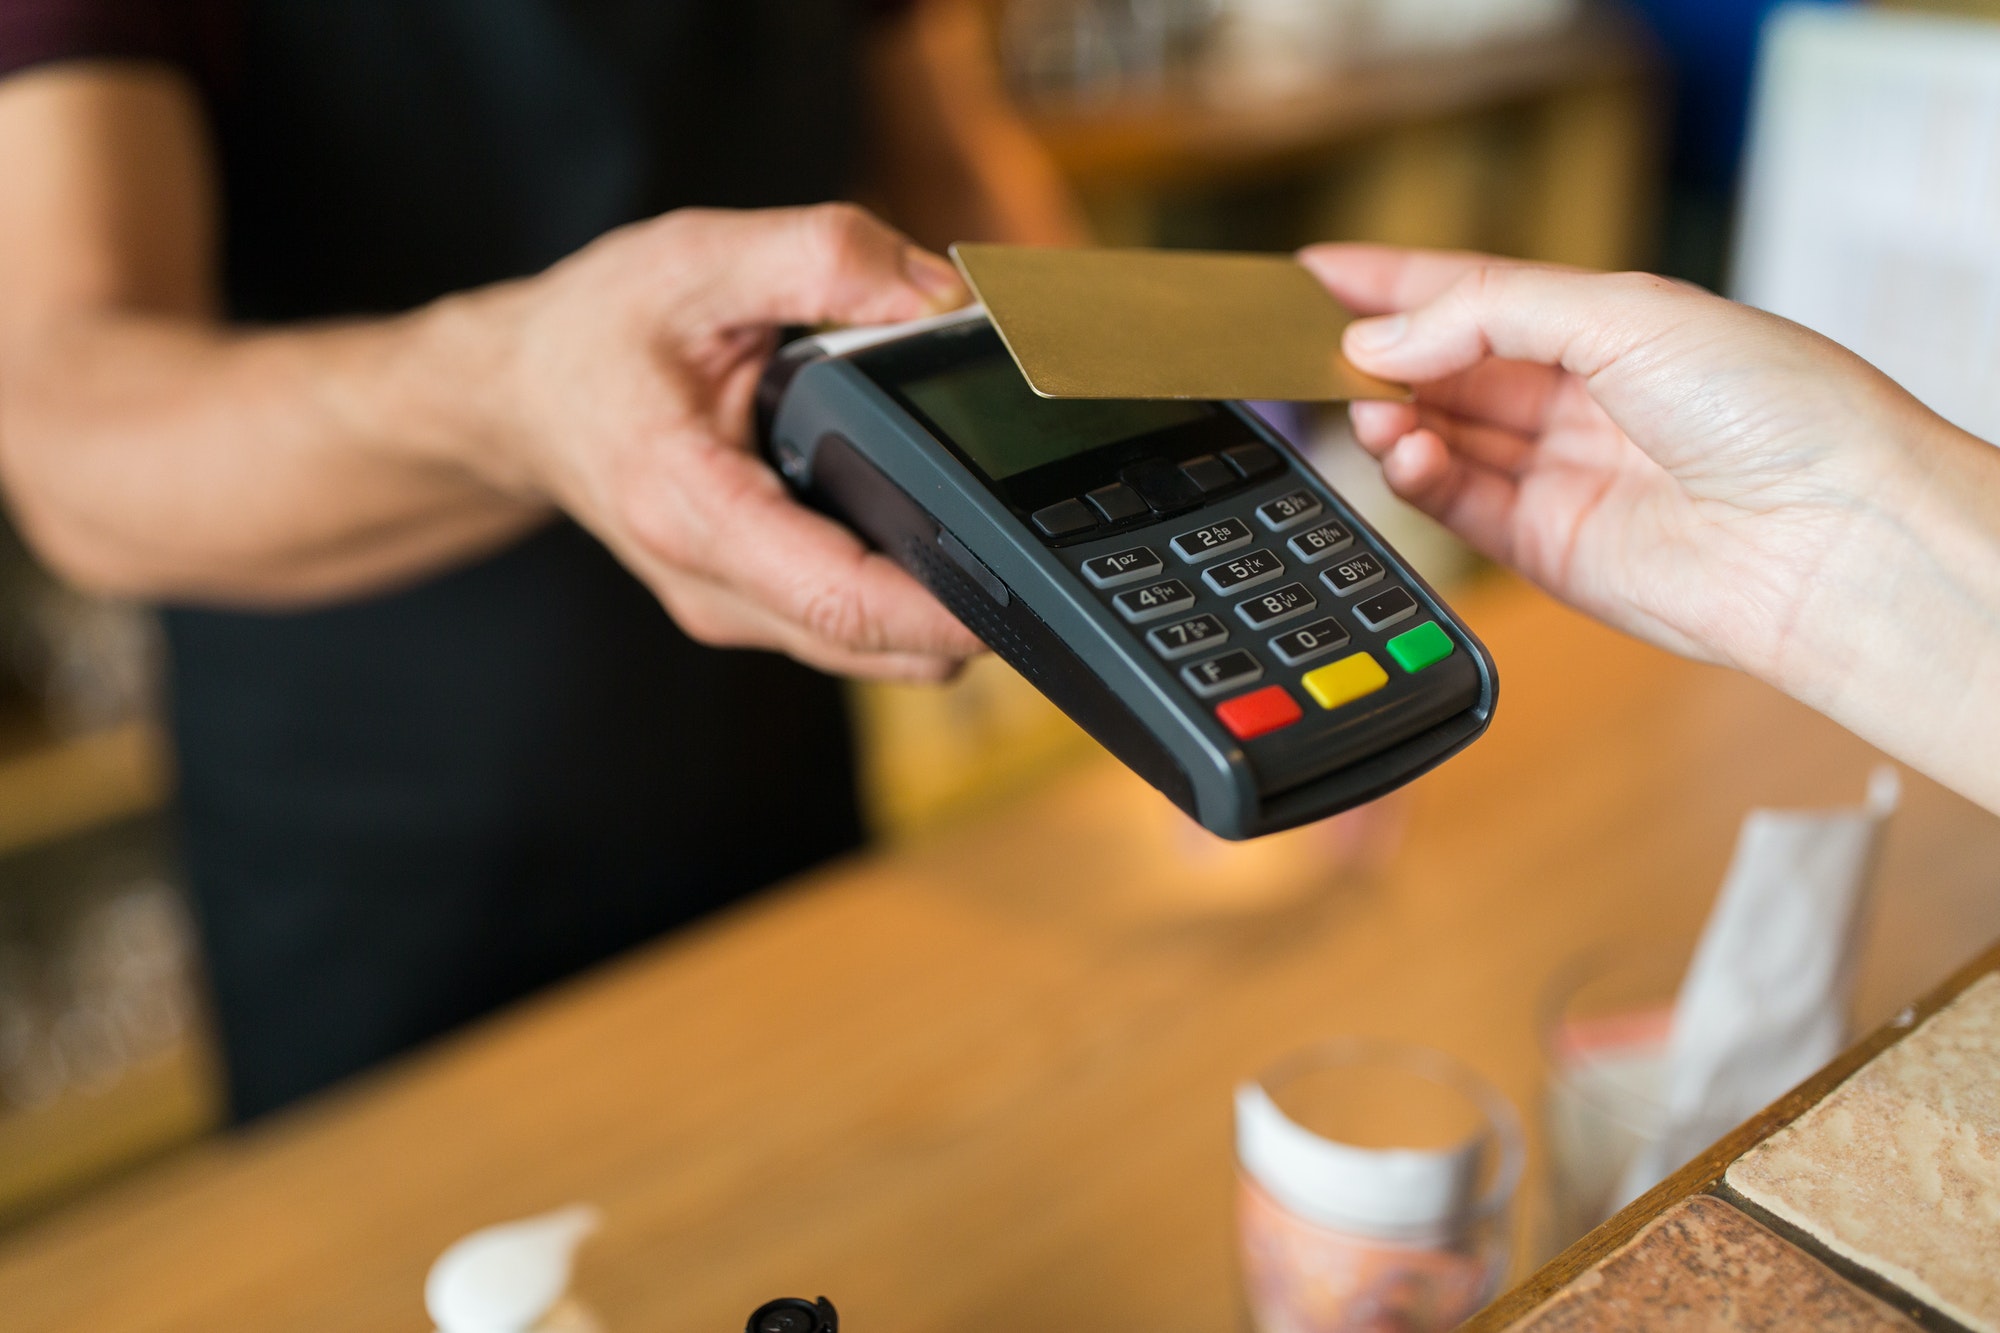 hands with payment terminal and credit card